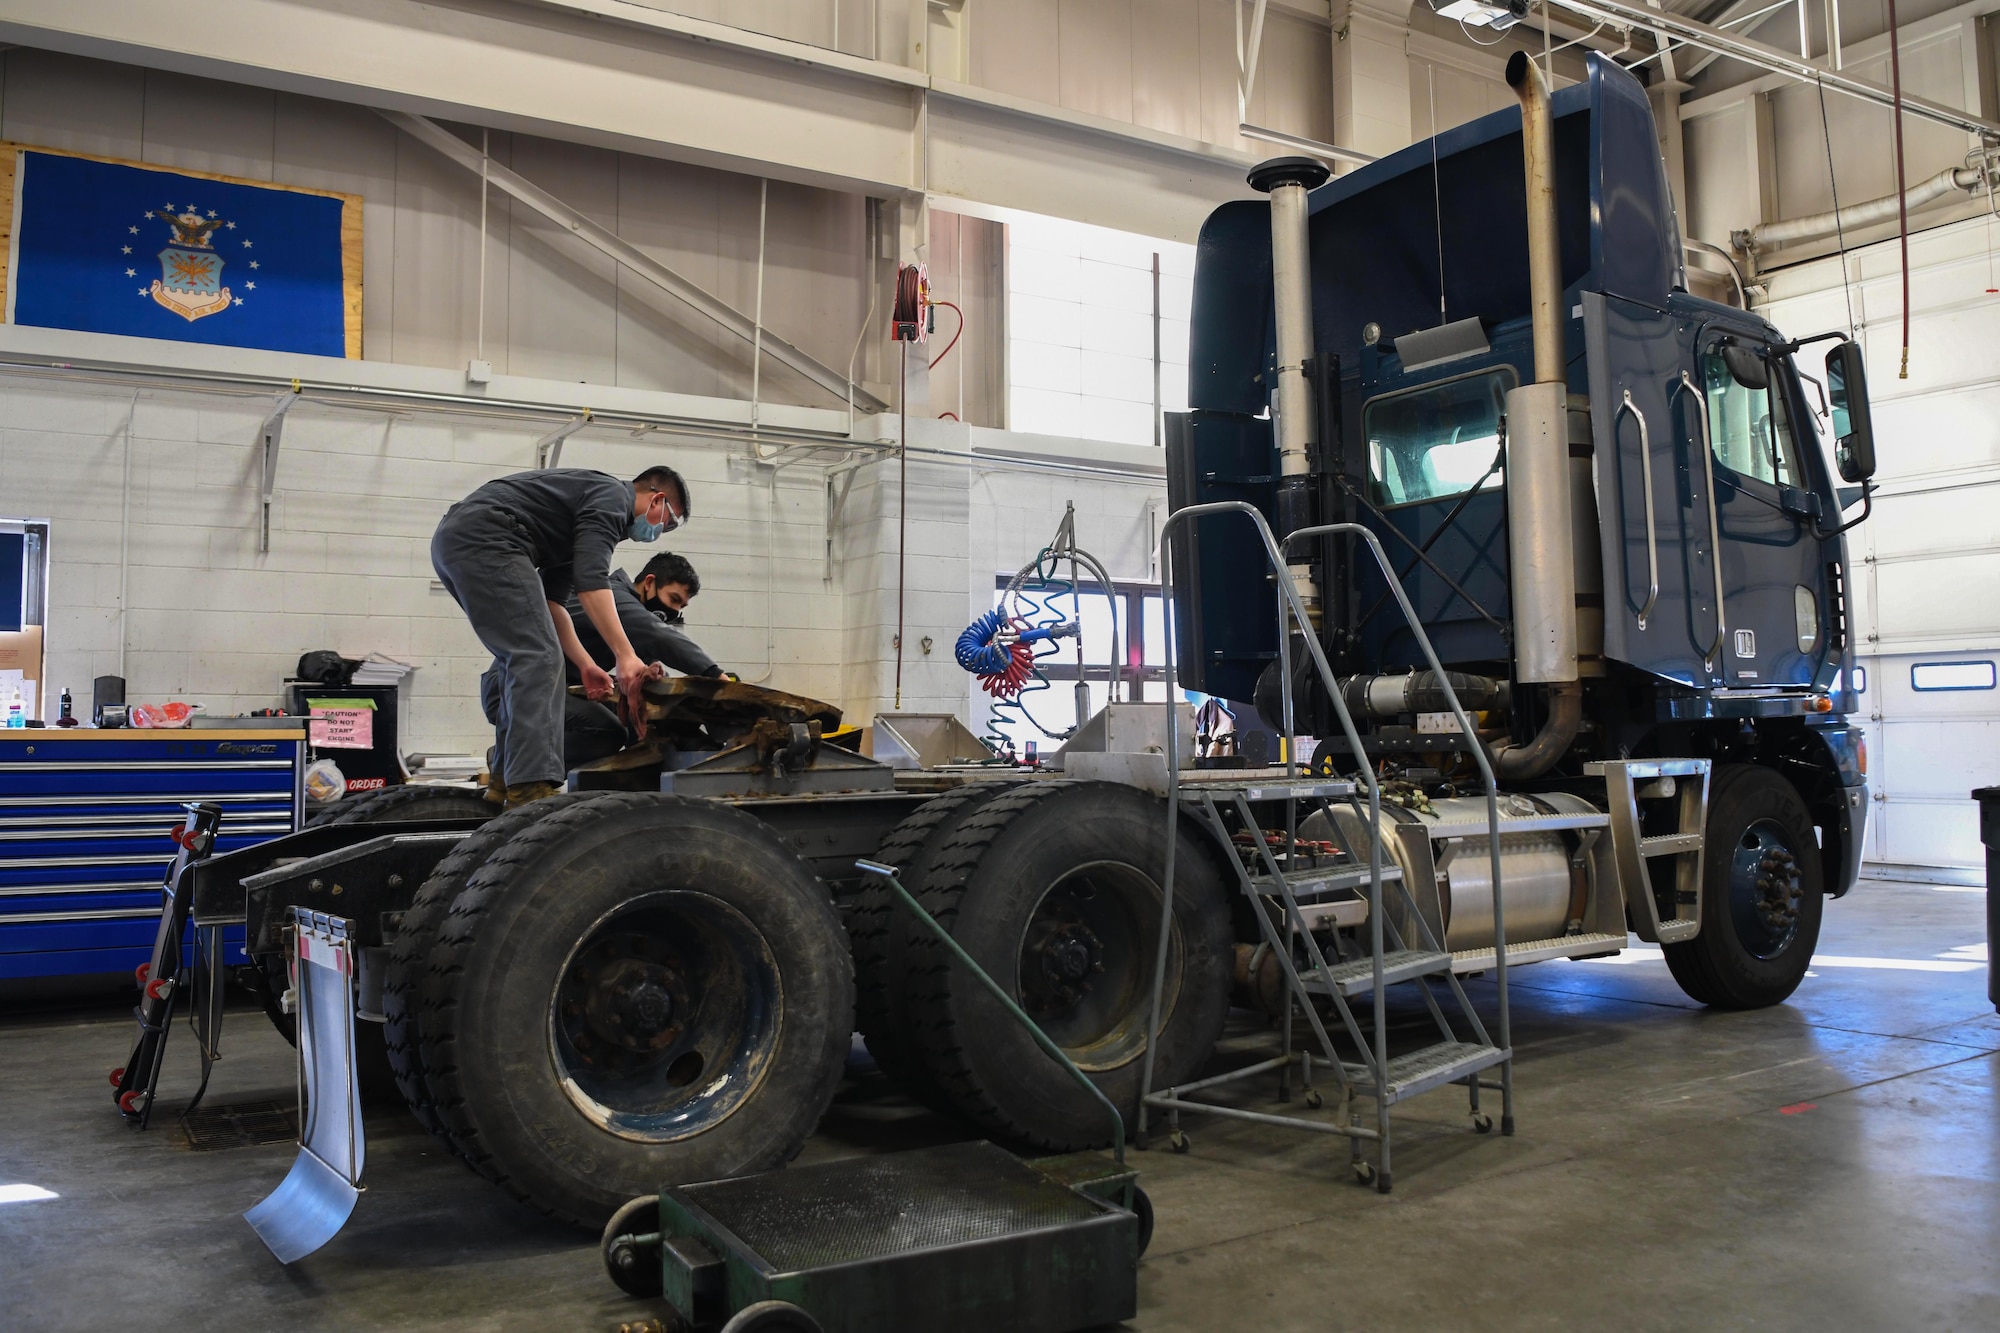 Airman 1st Class An Luu, vehicle mechanic (left), and Airman 1st Class Indigo Schultz, mission generation vehicular equipment maintenance technician, both at the 90th Logistics Squadron, work on a Payload Transporter III at the 90 LRS Vehicle Maintenance Flight warehouse on F.E. Warren Air Force Base, Wyoming, Feb. 8, 2022. The PT III provides the ability to load, unload, transport, emplace, or remove and replace Minuteman weapon system aerospace vehicle equipment and supporting equipment in a controlled environment on air-cushioned pallets between the Minuteman launch facility and the missile support base. (U.S. Air Force photo by Airman 1st Class Charles Munoz)